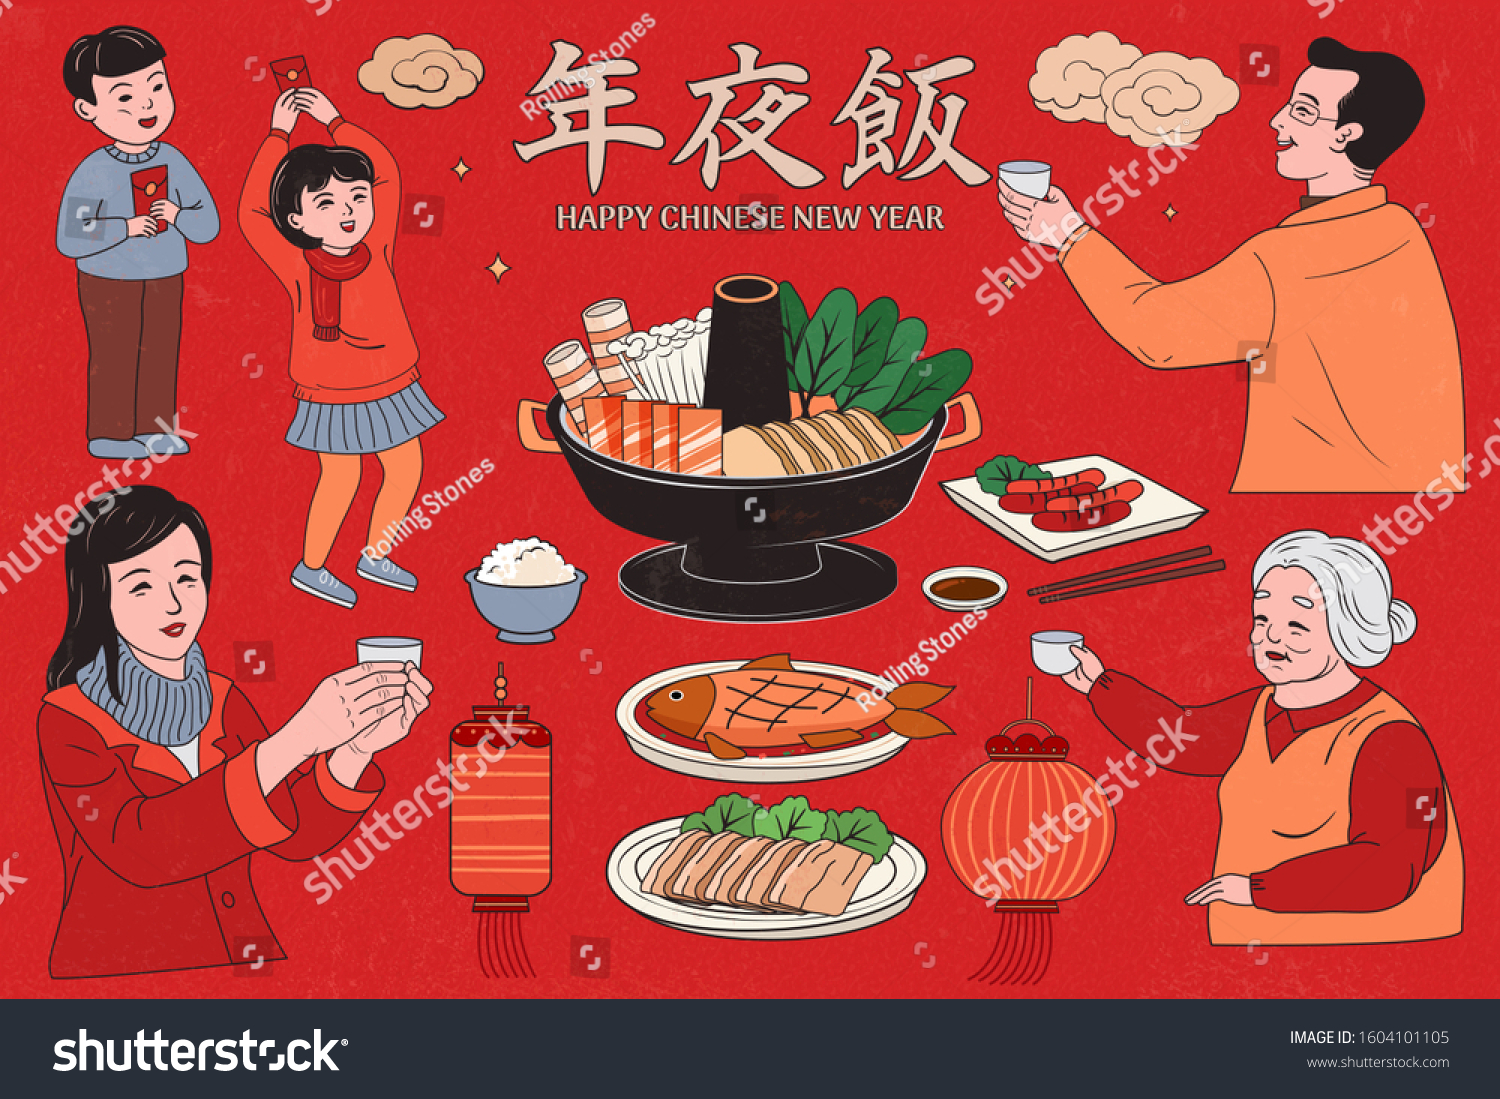 SVG of Delicious dishes and people propose a toast design collection, Reunion dinner written in Chinese text svg